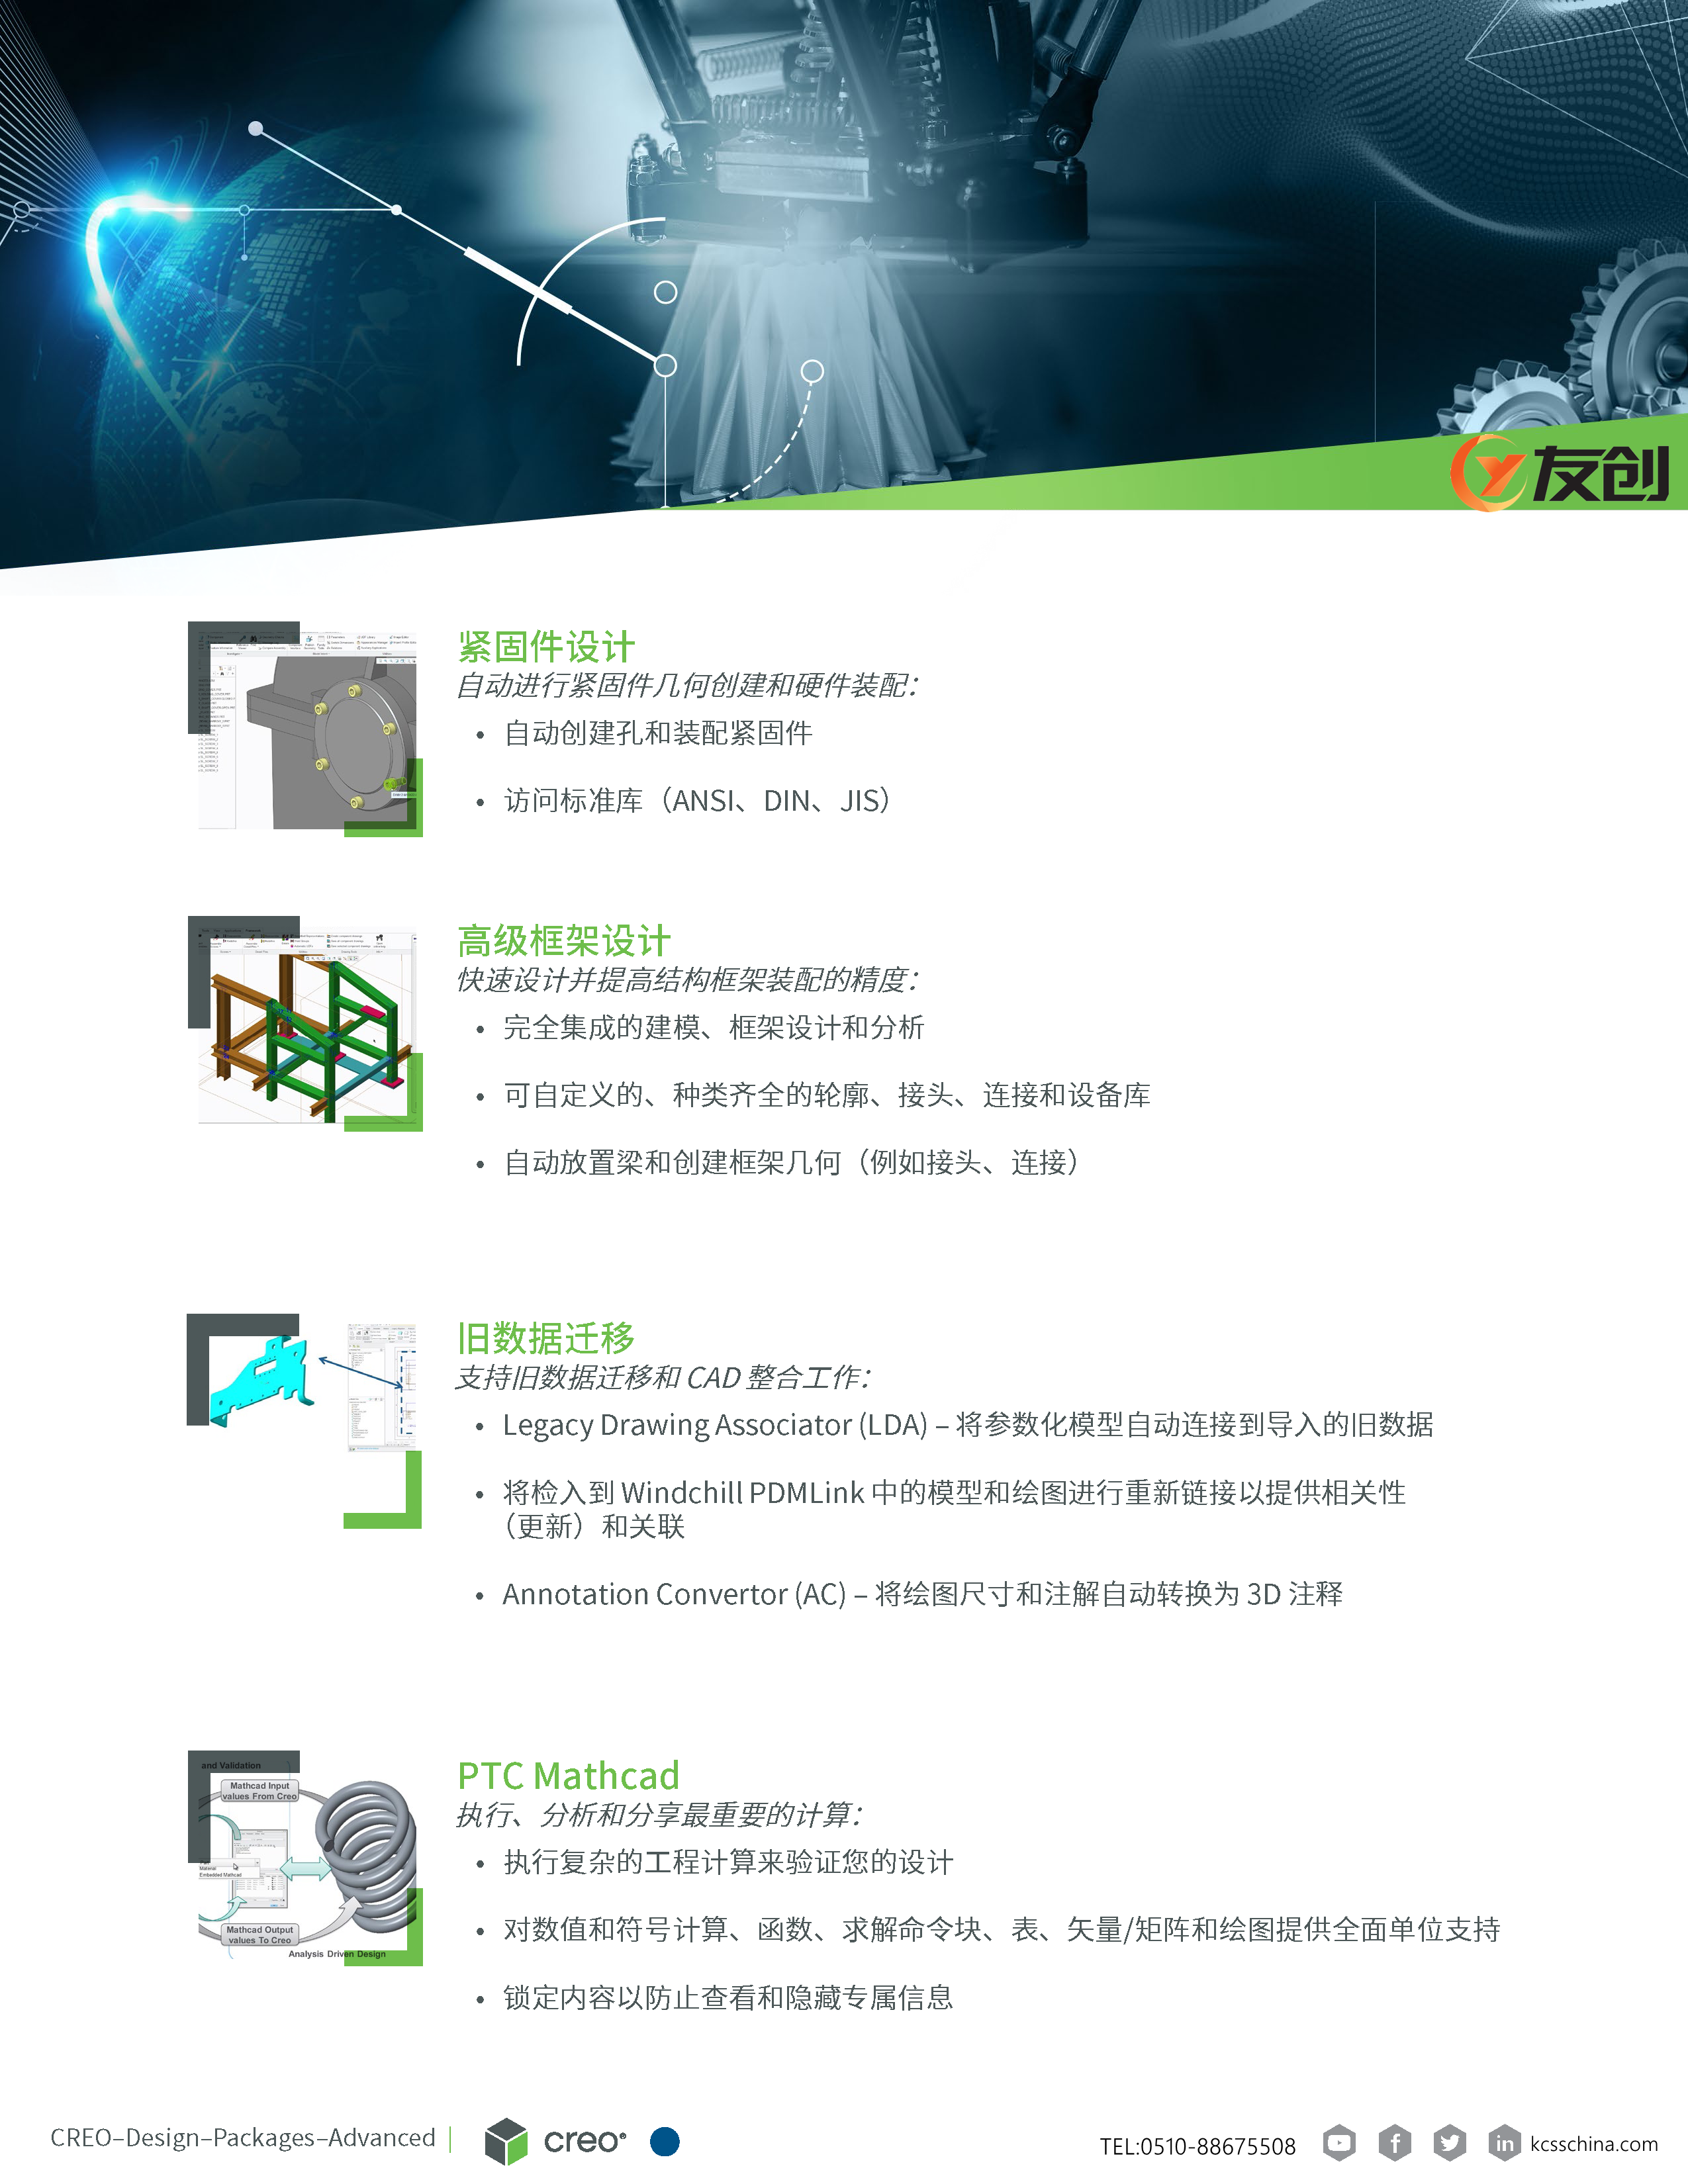 Creo Design Advanced Brochure (Simplified Chinese)_页面_4_副本.png